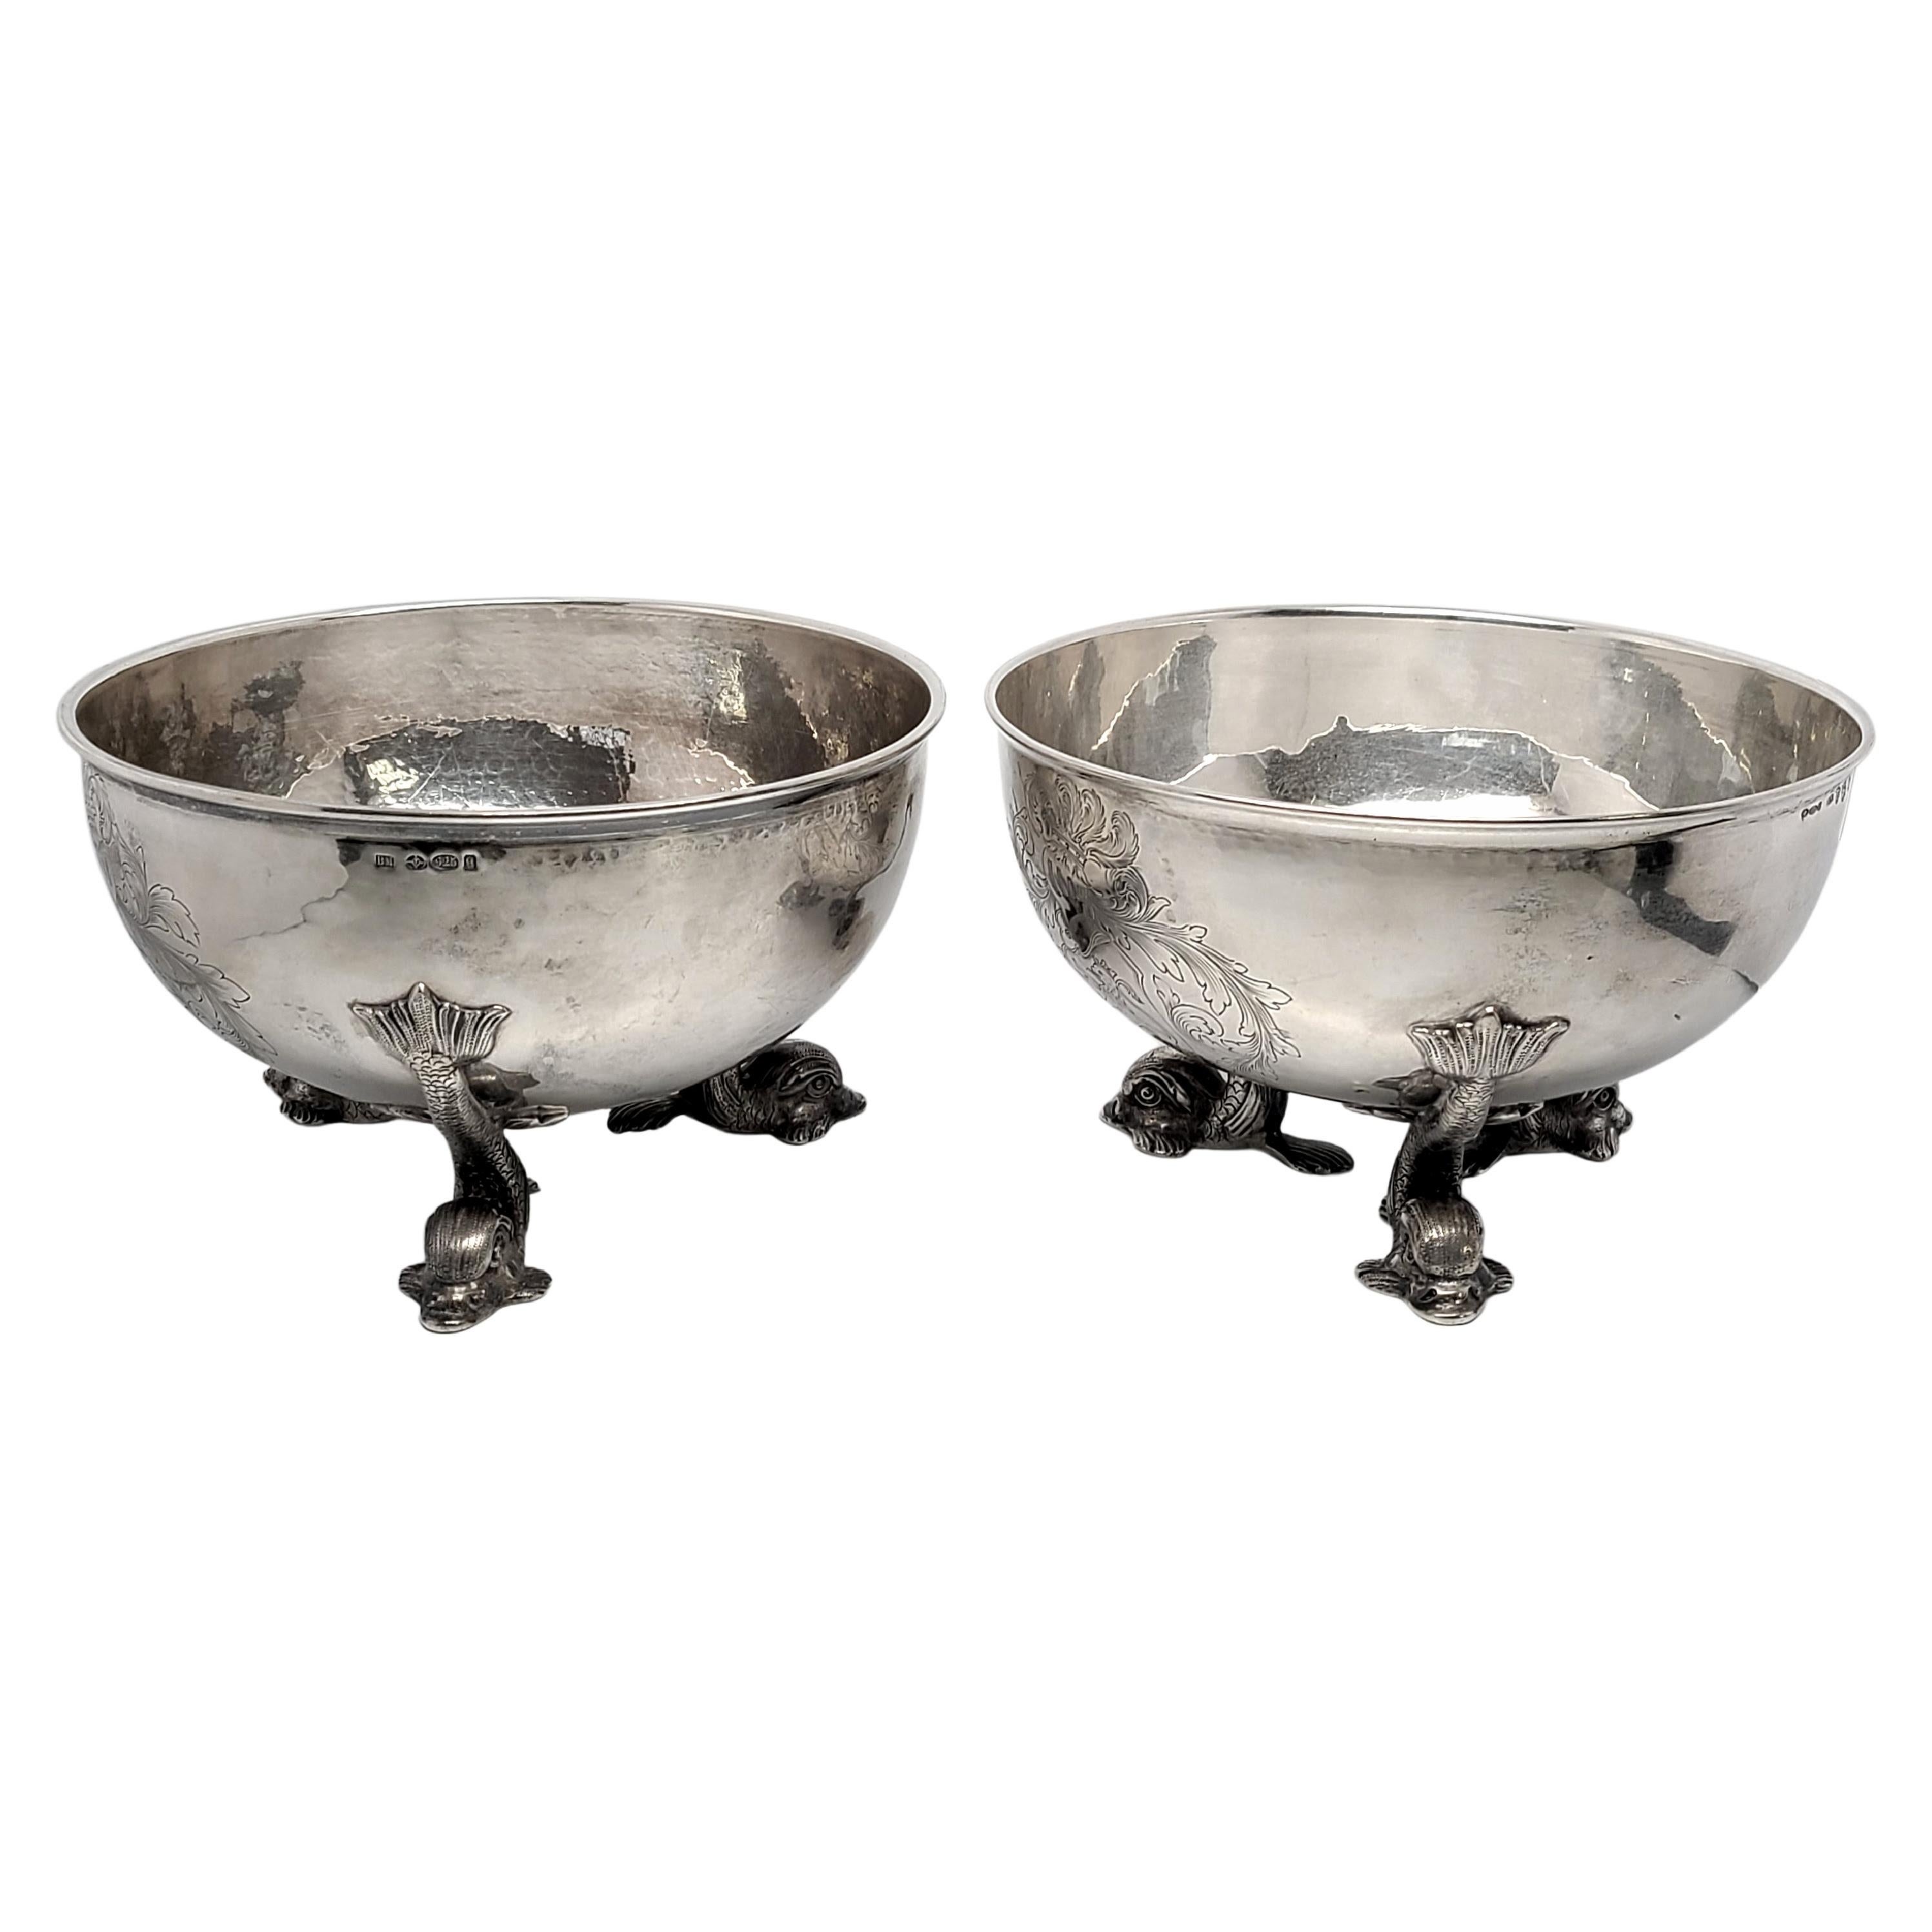 Set of 2 antique Hanau sterling silver large footed bowls.

Large and substantial bowls are lightly hammered with an etched knight design. Each sits atop has 3 fish shaped feet.

Each bowl has slightly different hallmarks, but the hallmarks